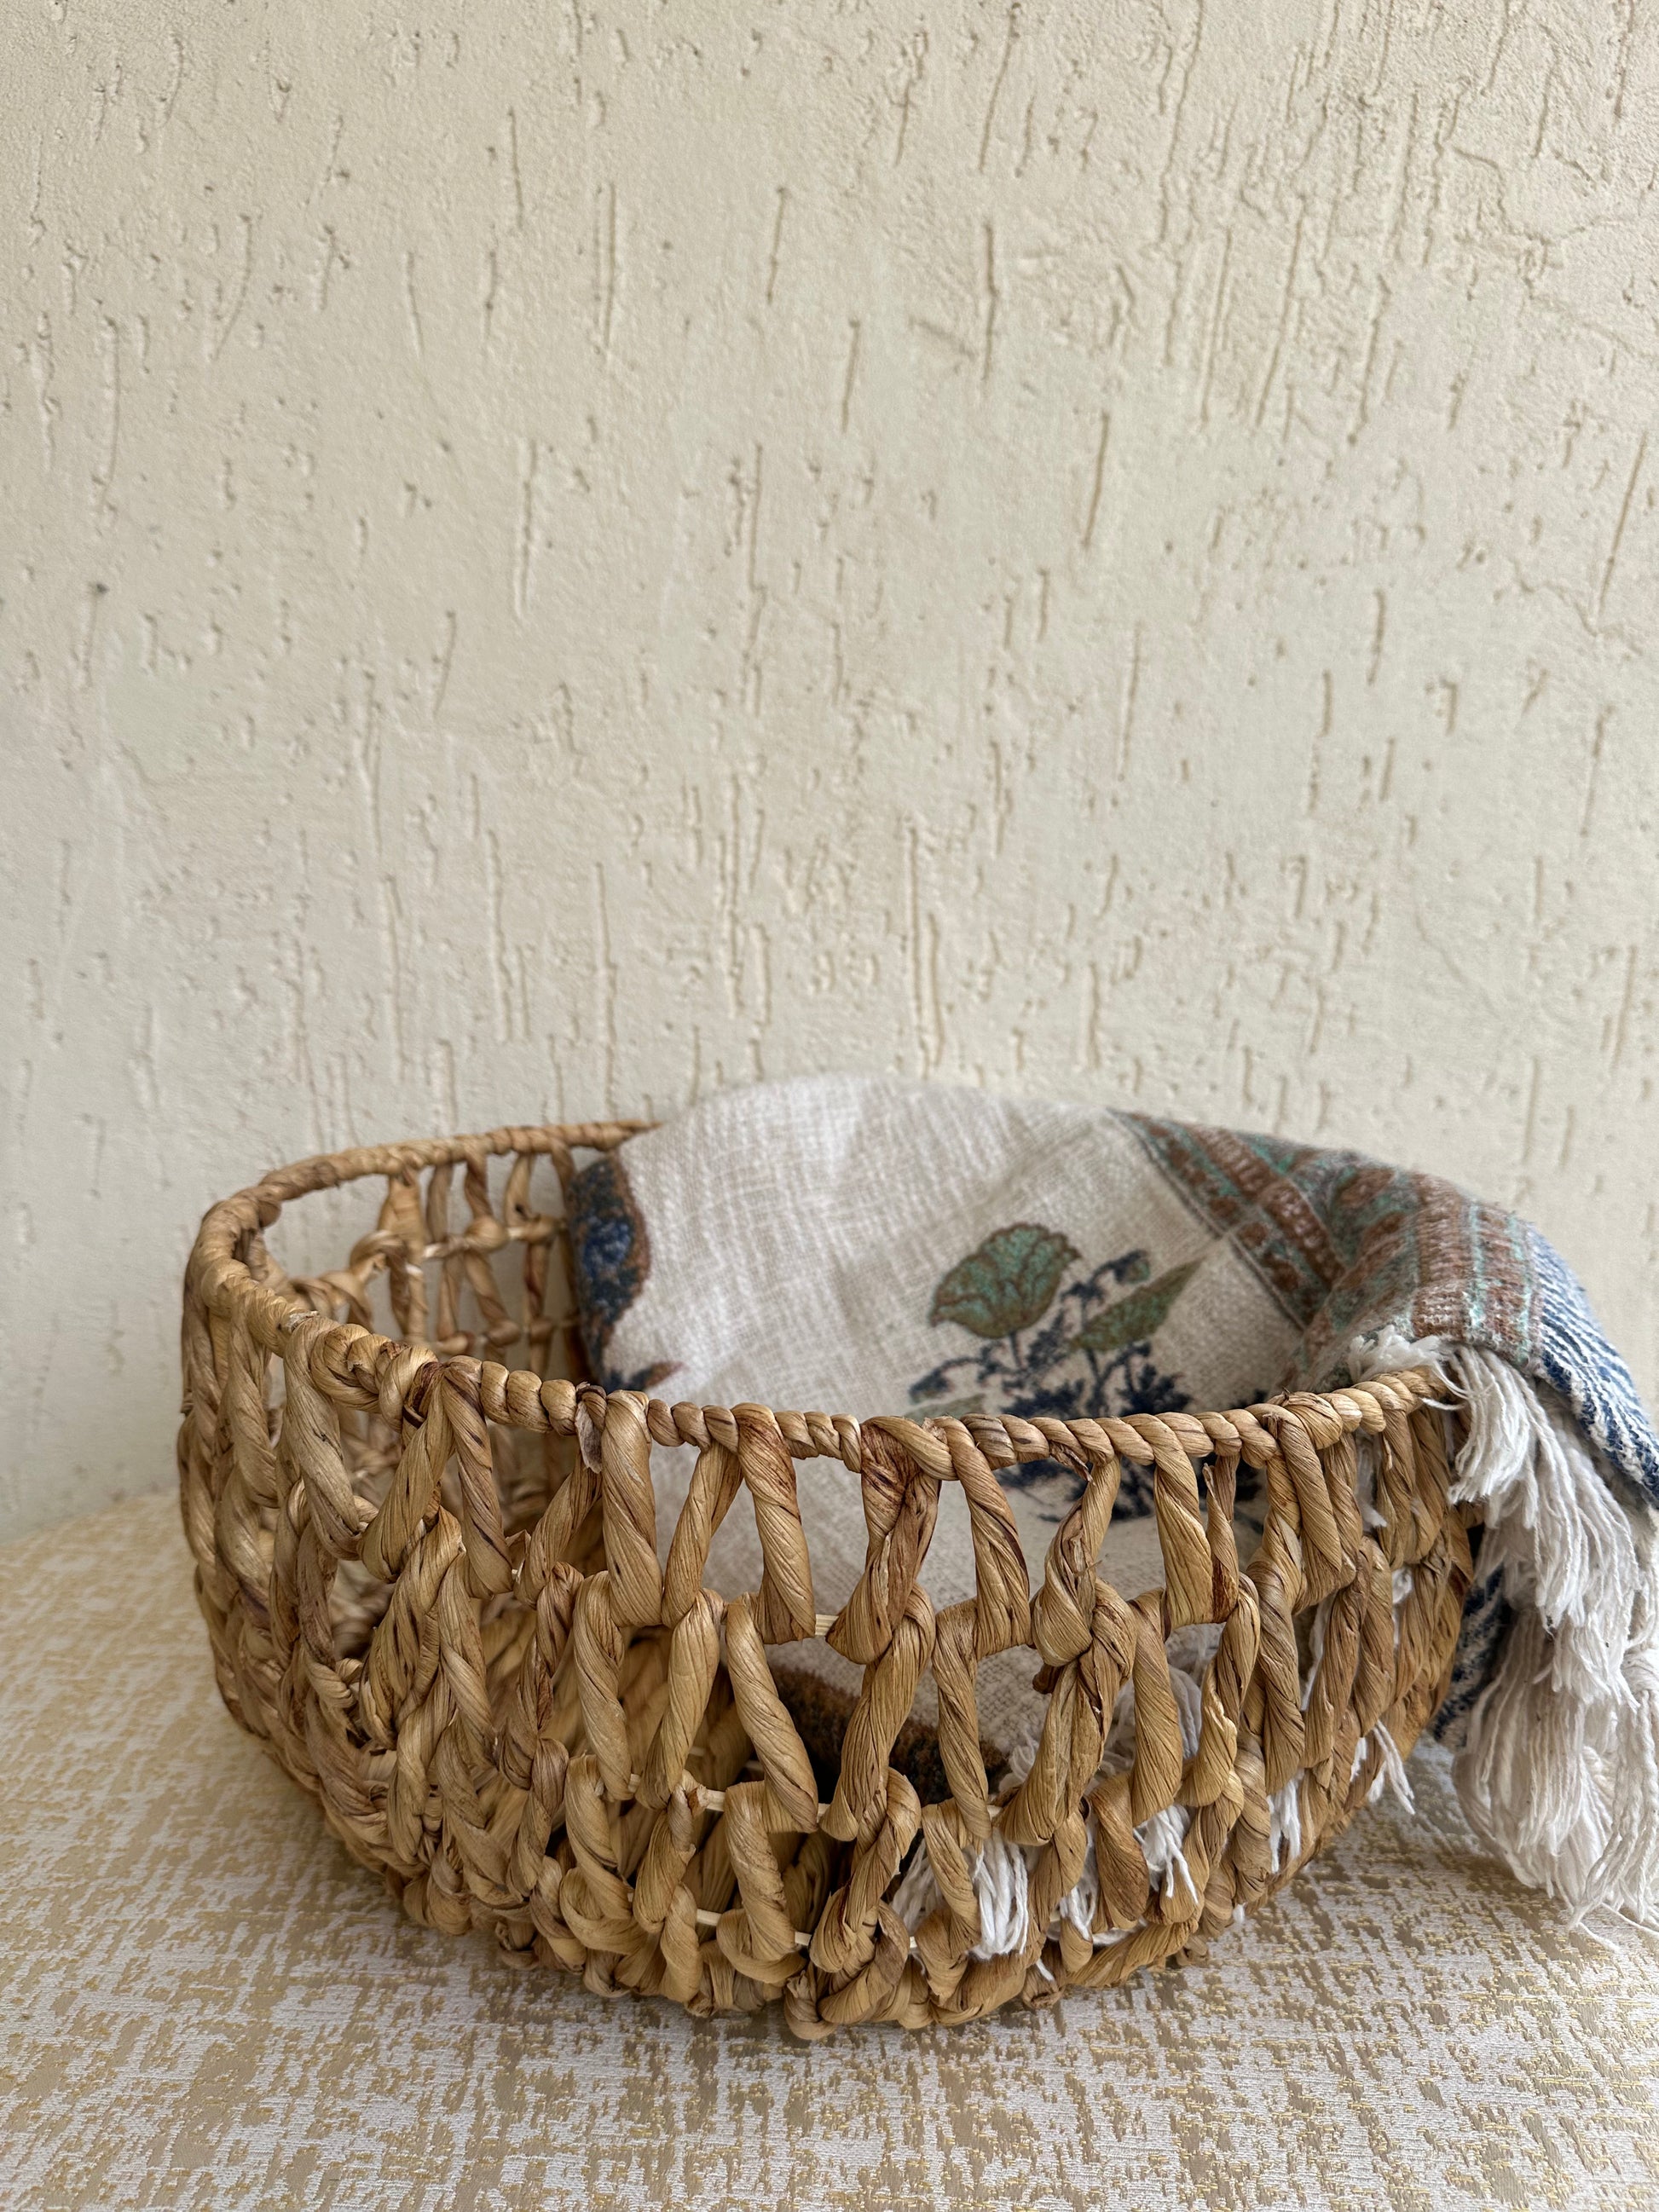  Aesthetics, Cut-Work baskets, Decorative home accents, Durability, Eco-conscious home décor, Functionality, Natural texture, Stylish storage options, Stylish storage solutions, Sustainability, Water Hyacinth Baskets, Water Hyacinth Cut-Work Basket, TESU